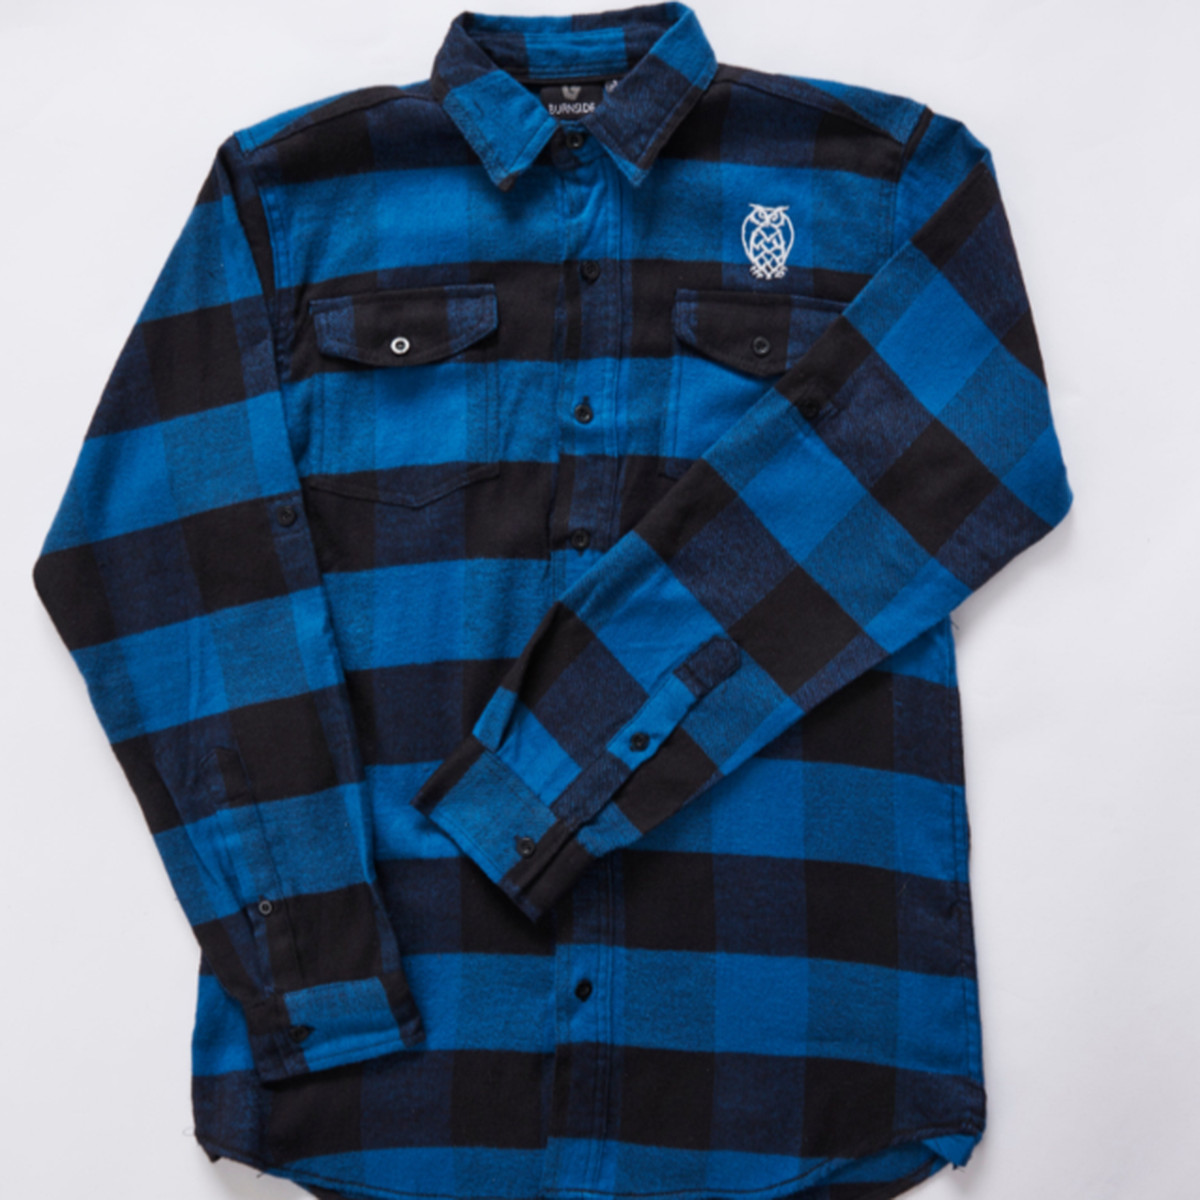 A blue and black flannel shirt with a small owl logo embroidered near the left shoulder